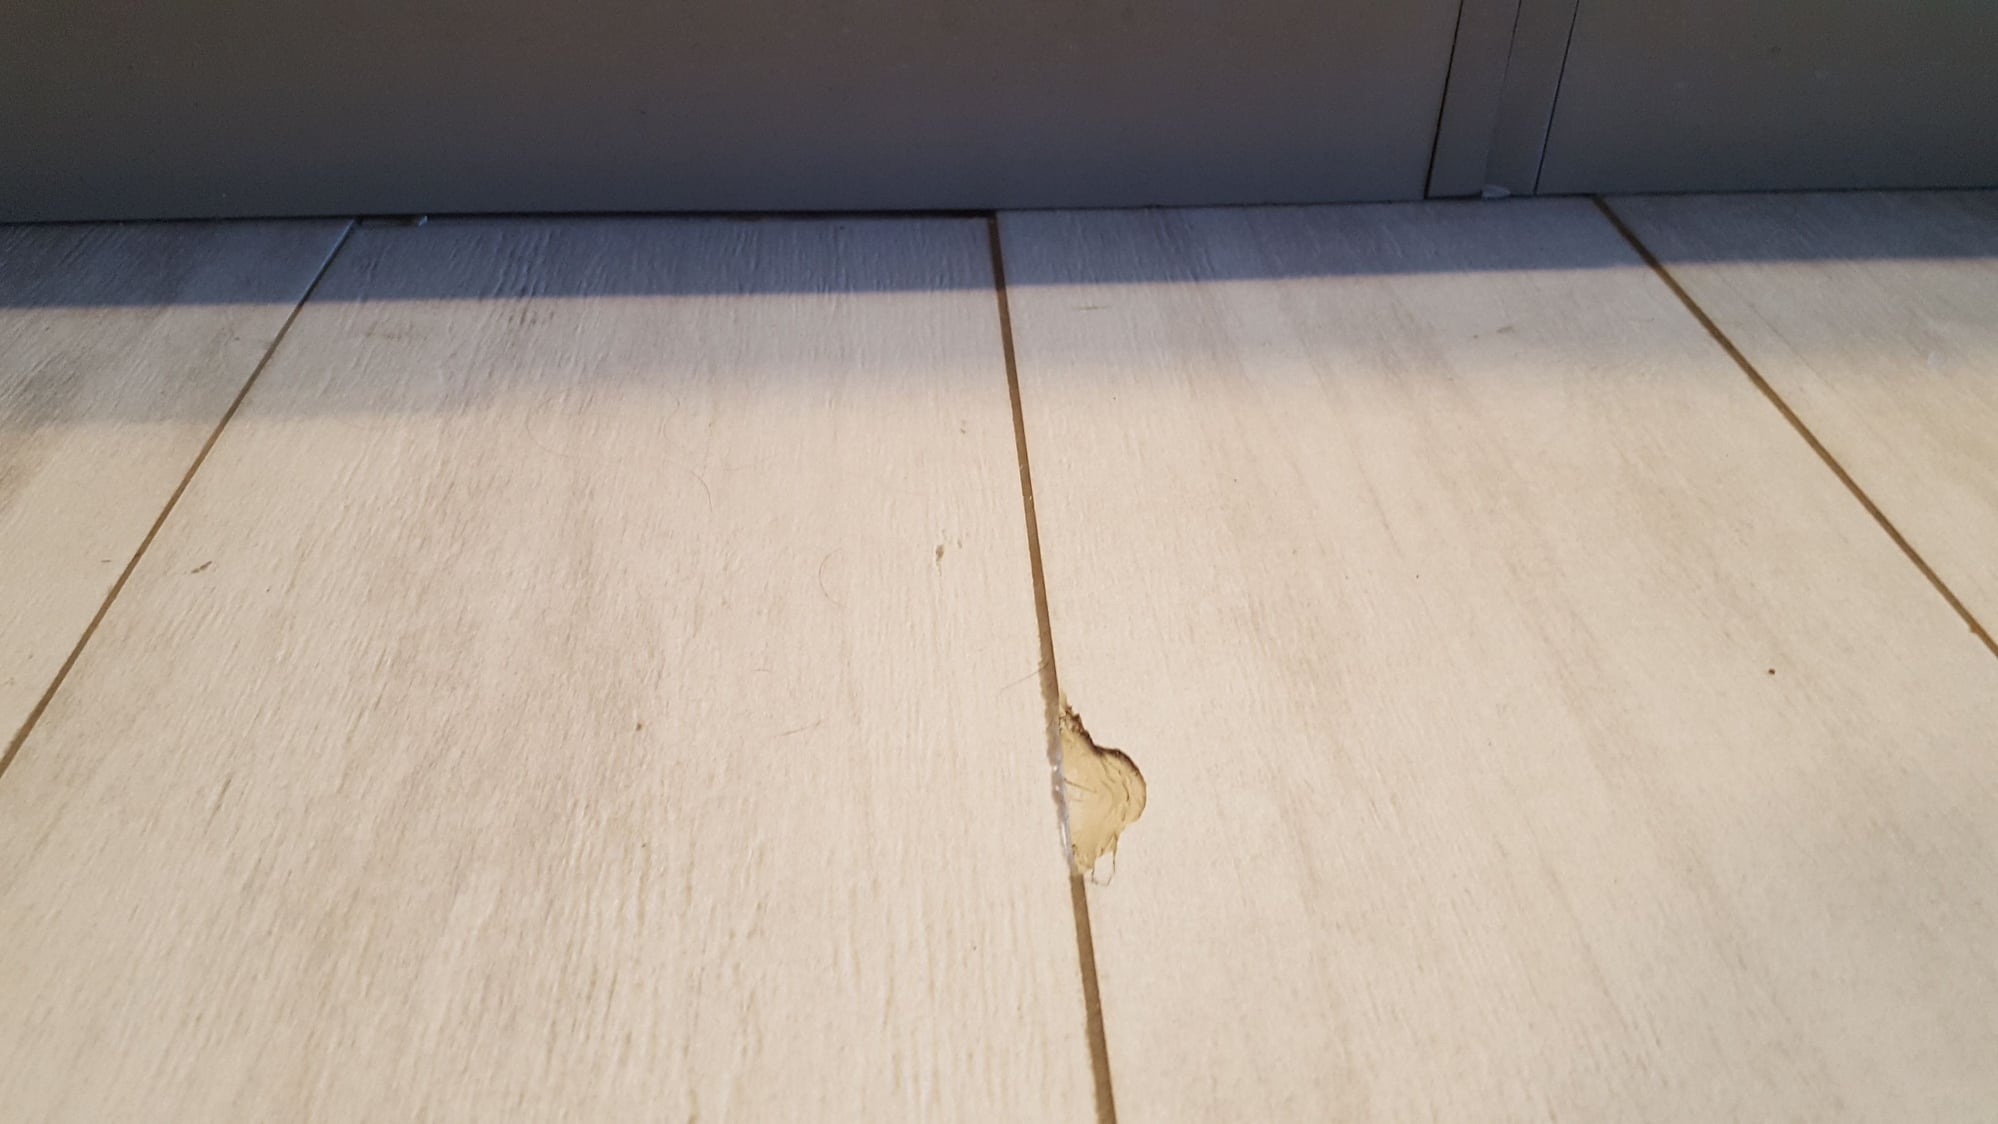 Chip in ceramic plank tile - The Hull Truth - Boating and Fishing Forum